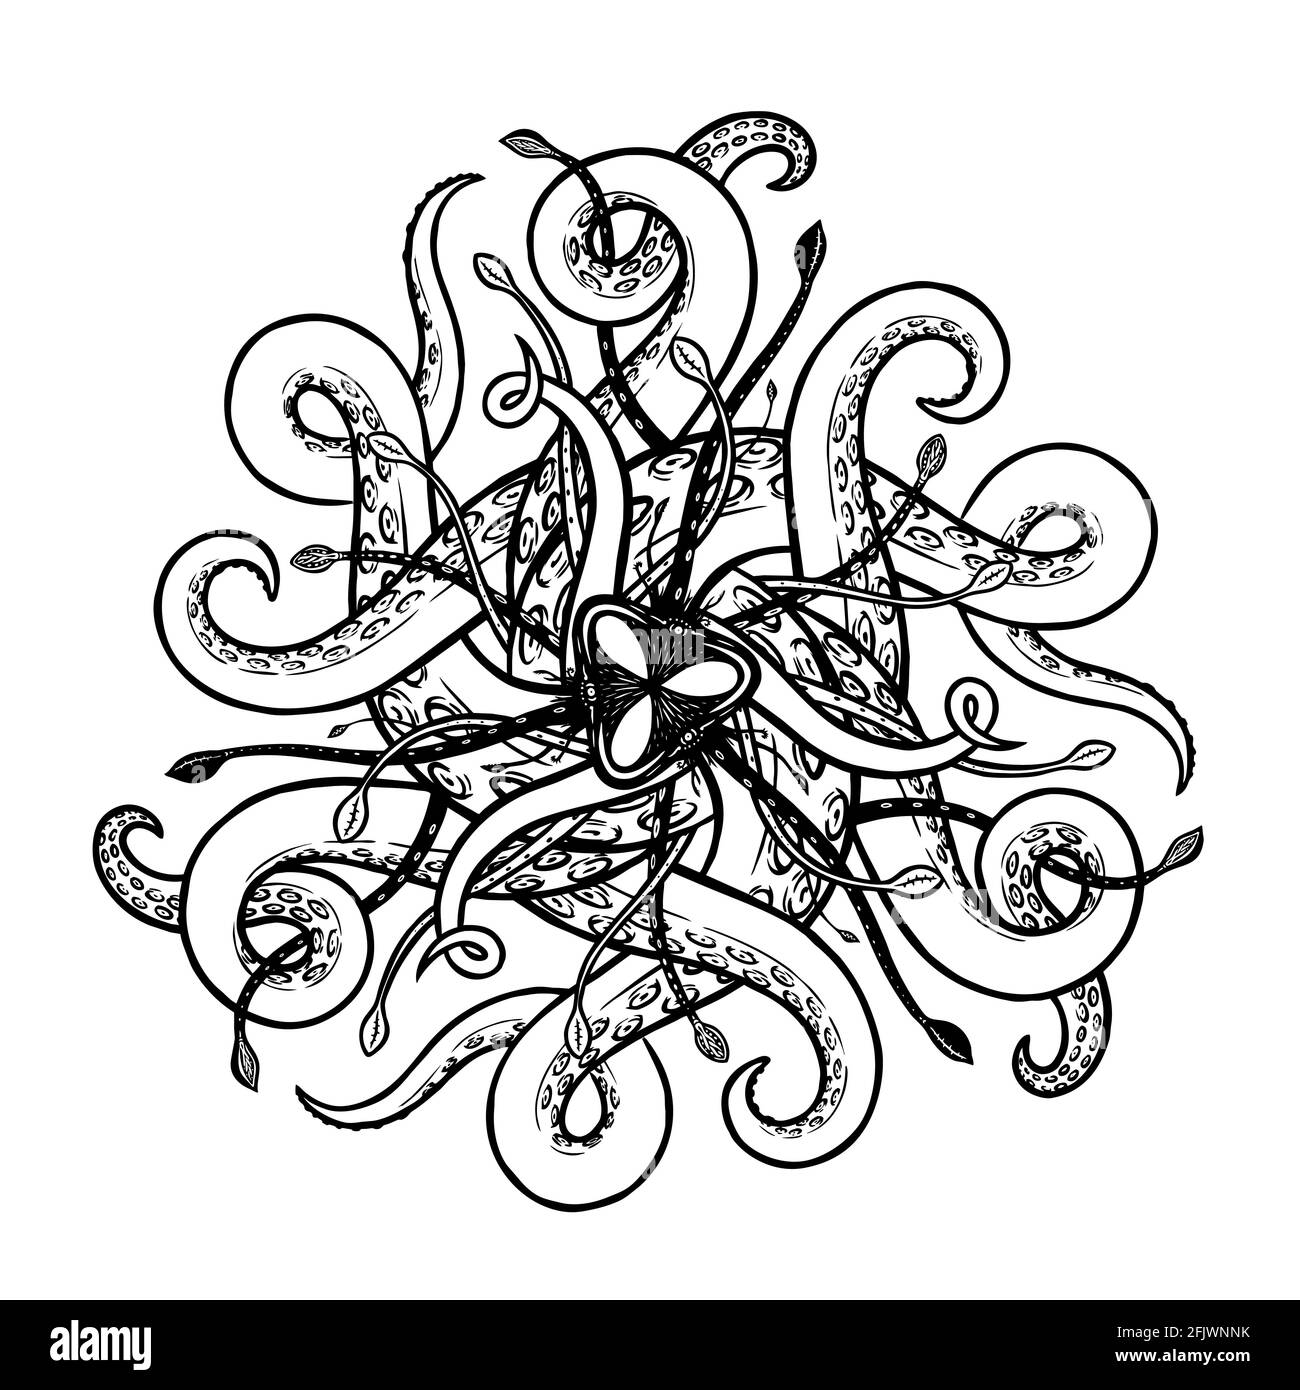 Abstract sketch vector marine ornament with tentacles and suction cups with radial symmetry Stock Vector